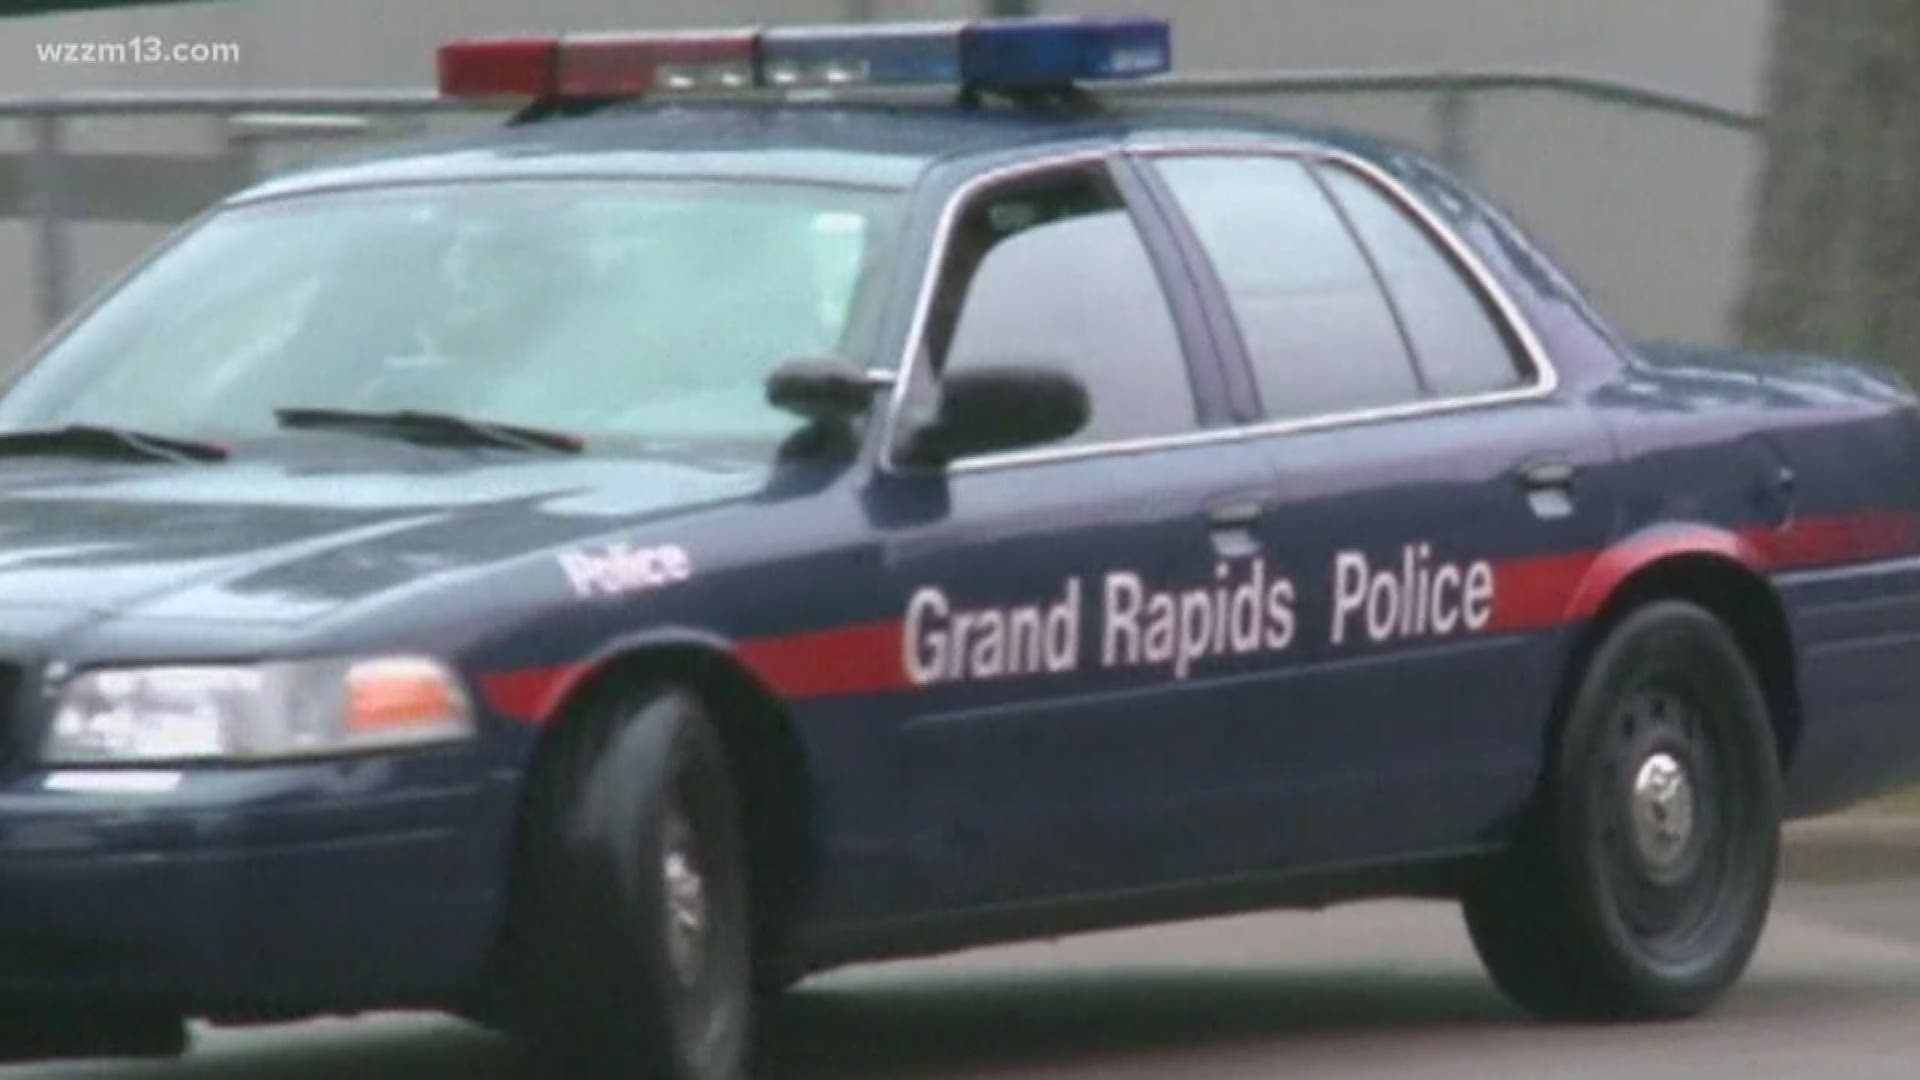 Grand Rapids Police pay it forward